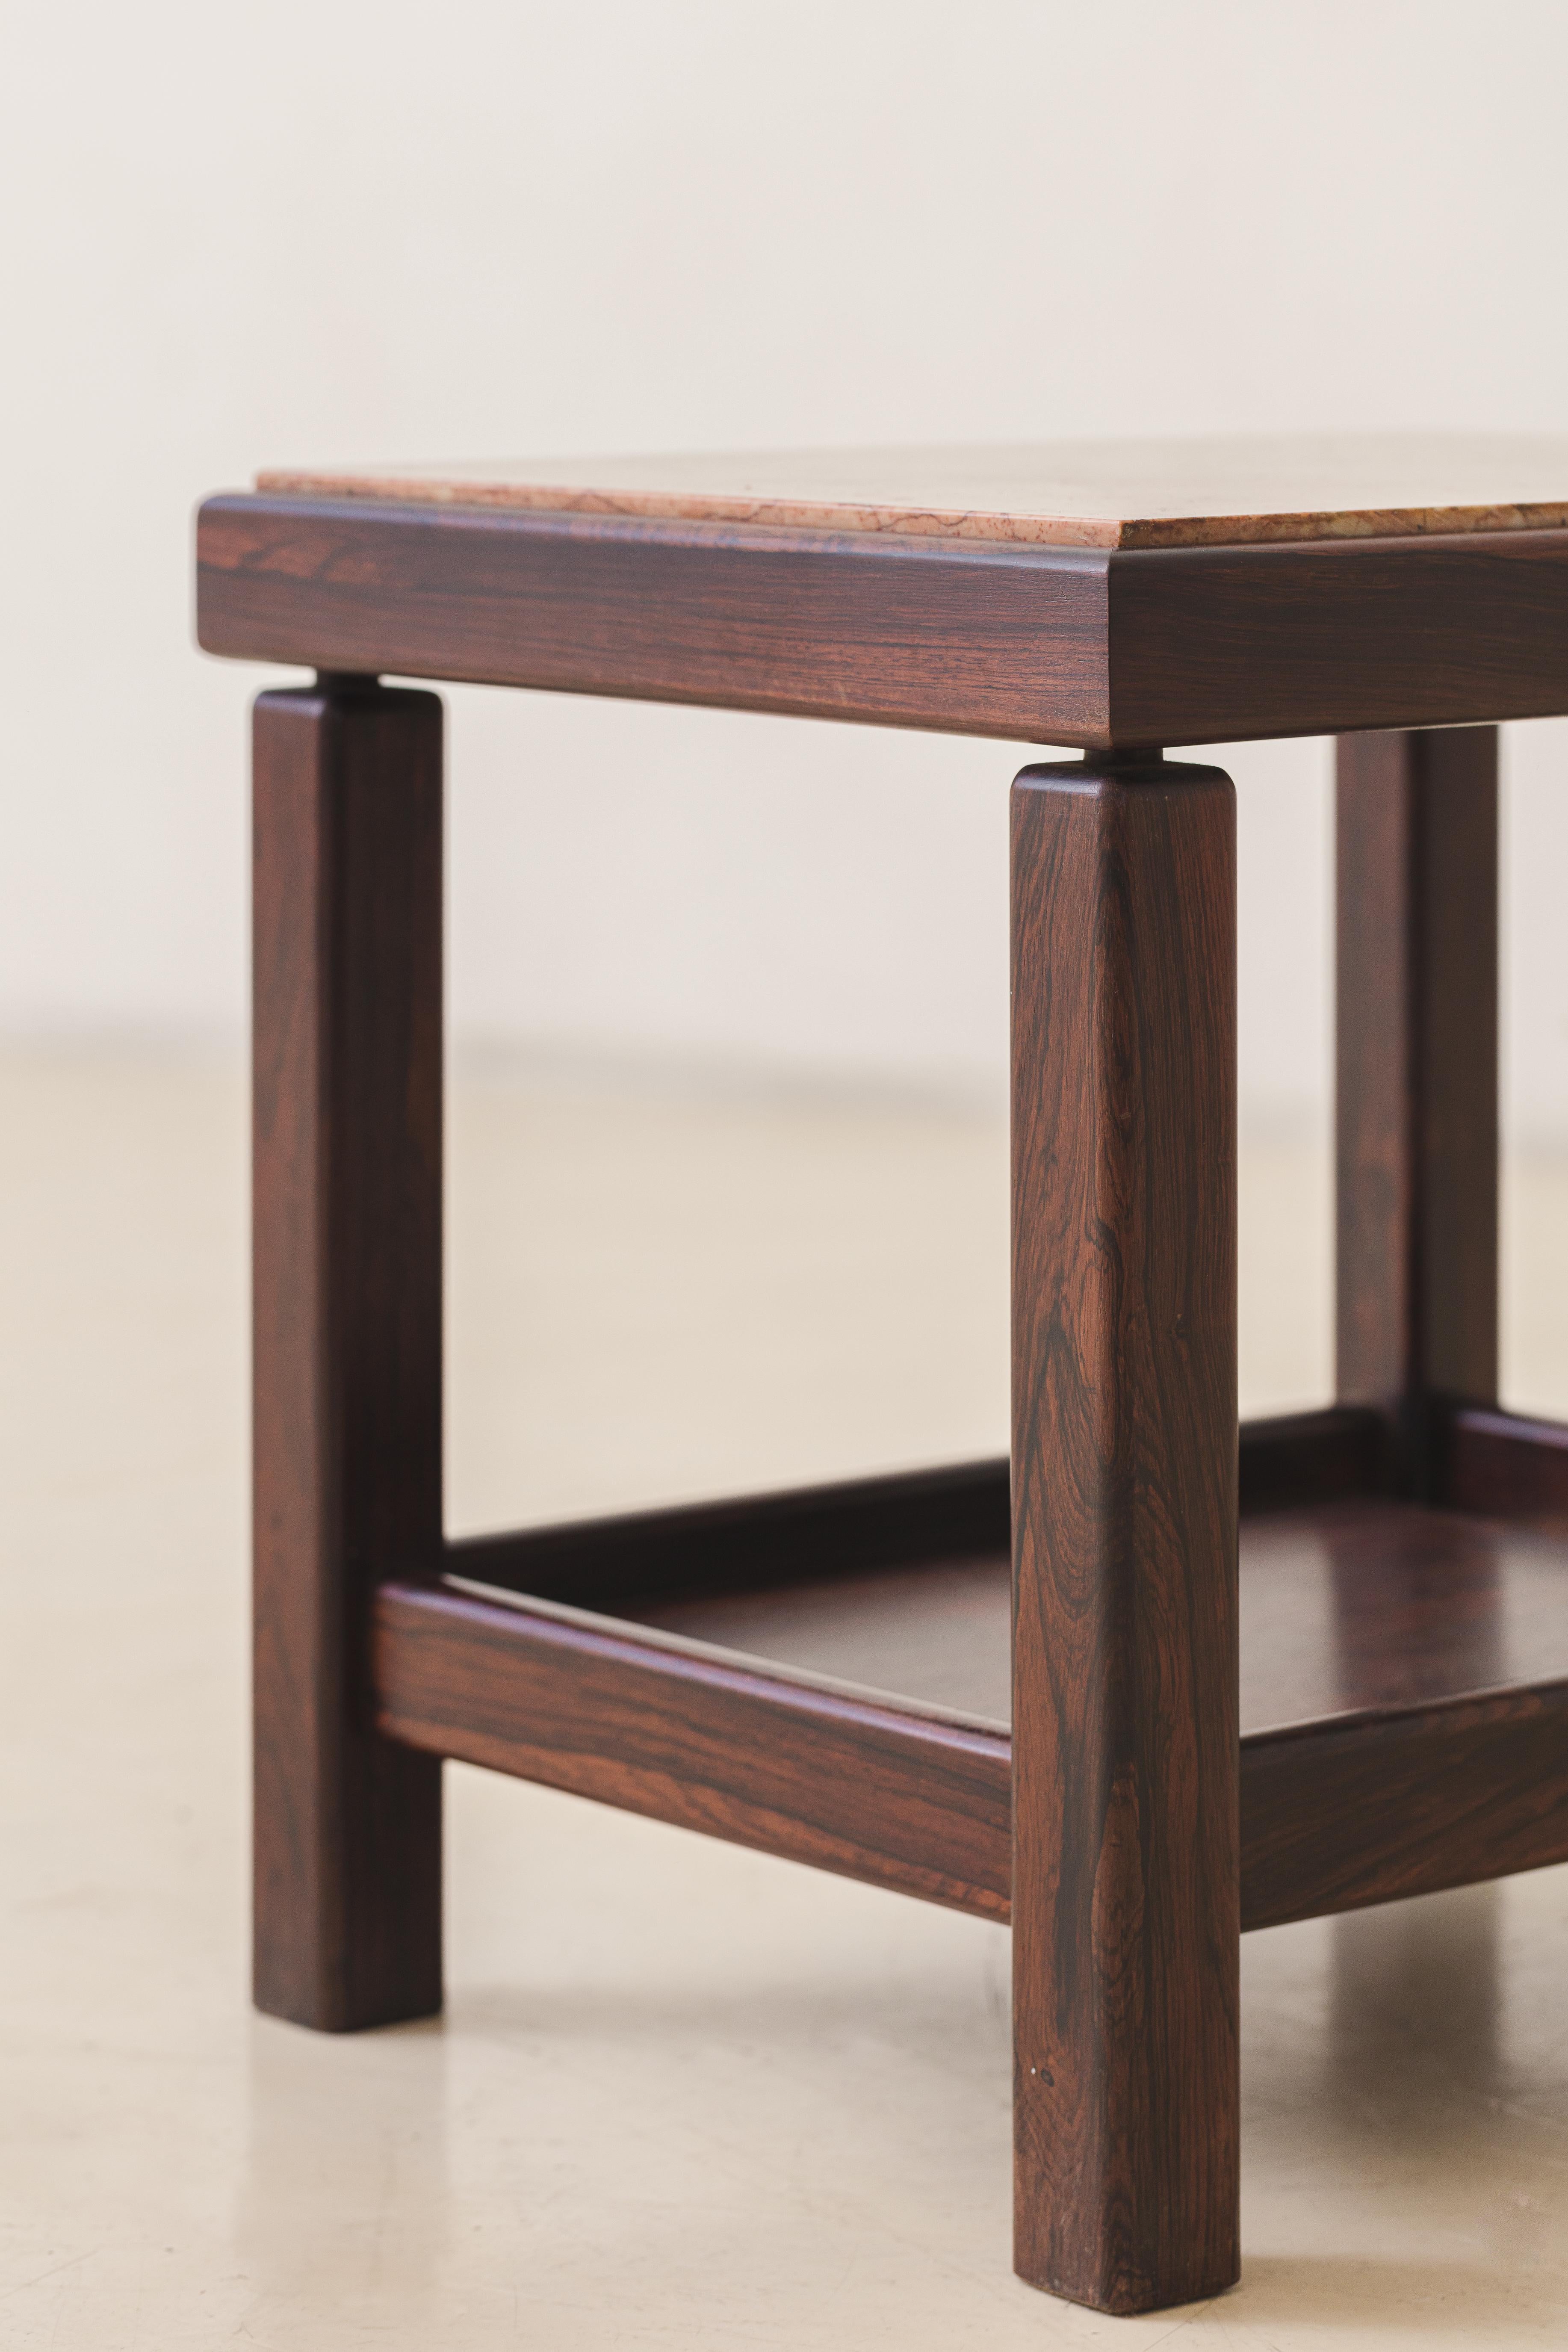 Pair of Rosewood and Marble Side Tables, Design by Unknown Artist, Brazil, 1960s For Sale 2